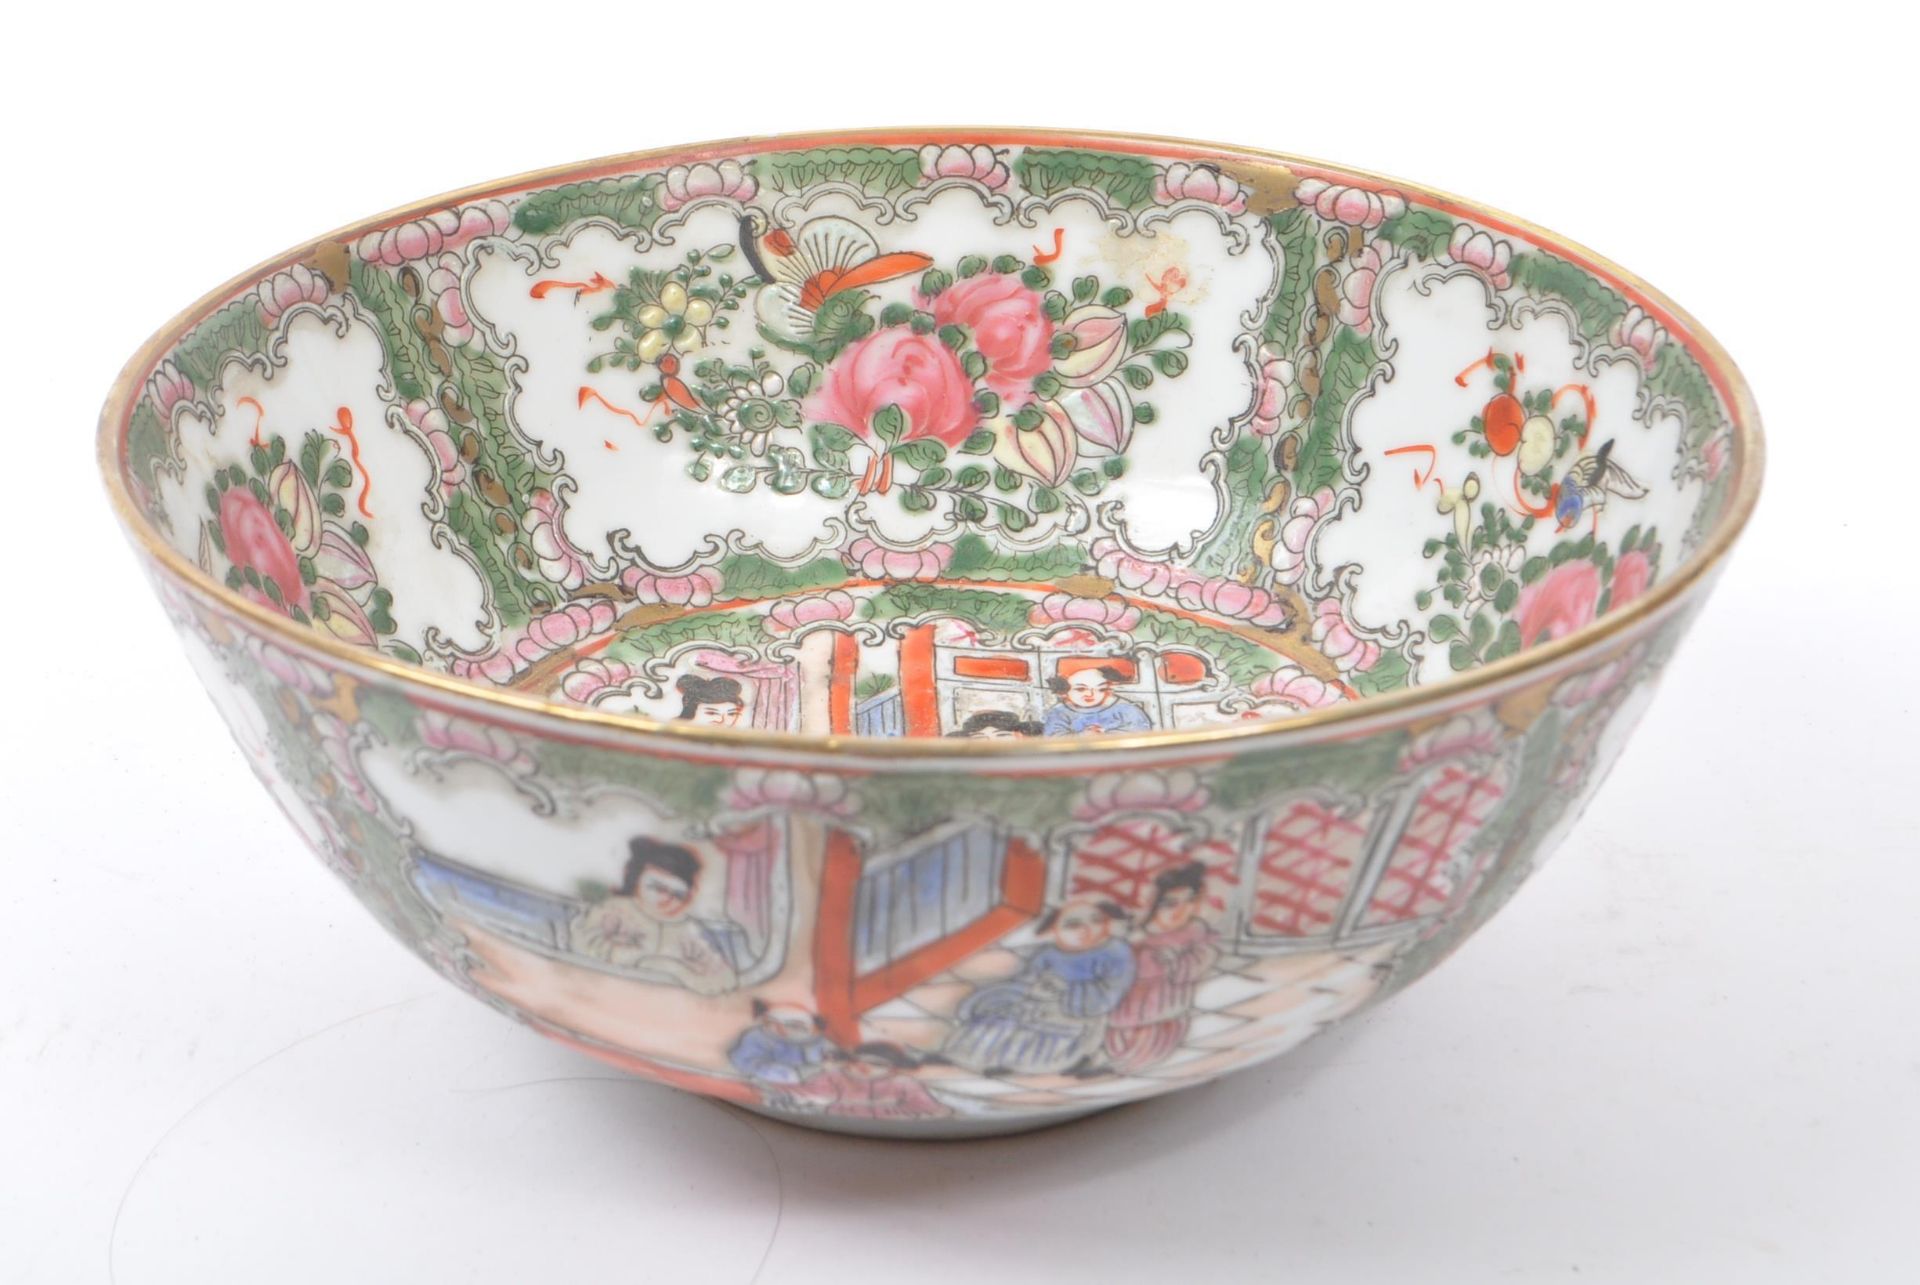 19TH CENTURY CHINESE PORCELAIN FAMILLE ROSE BOWL